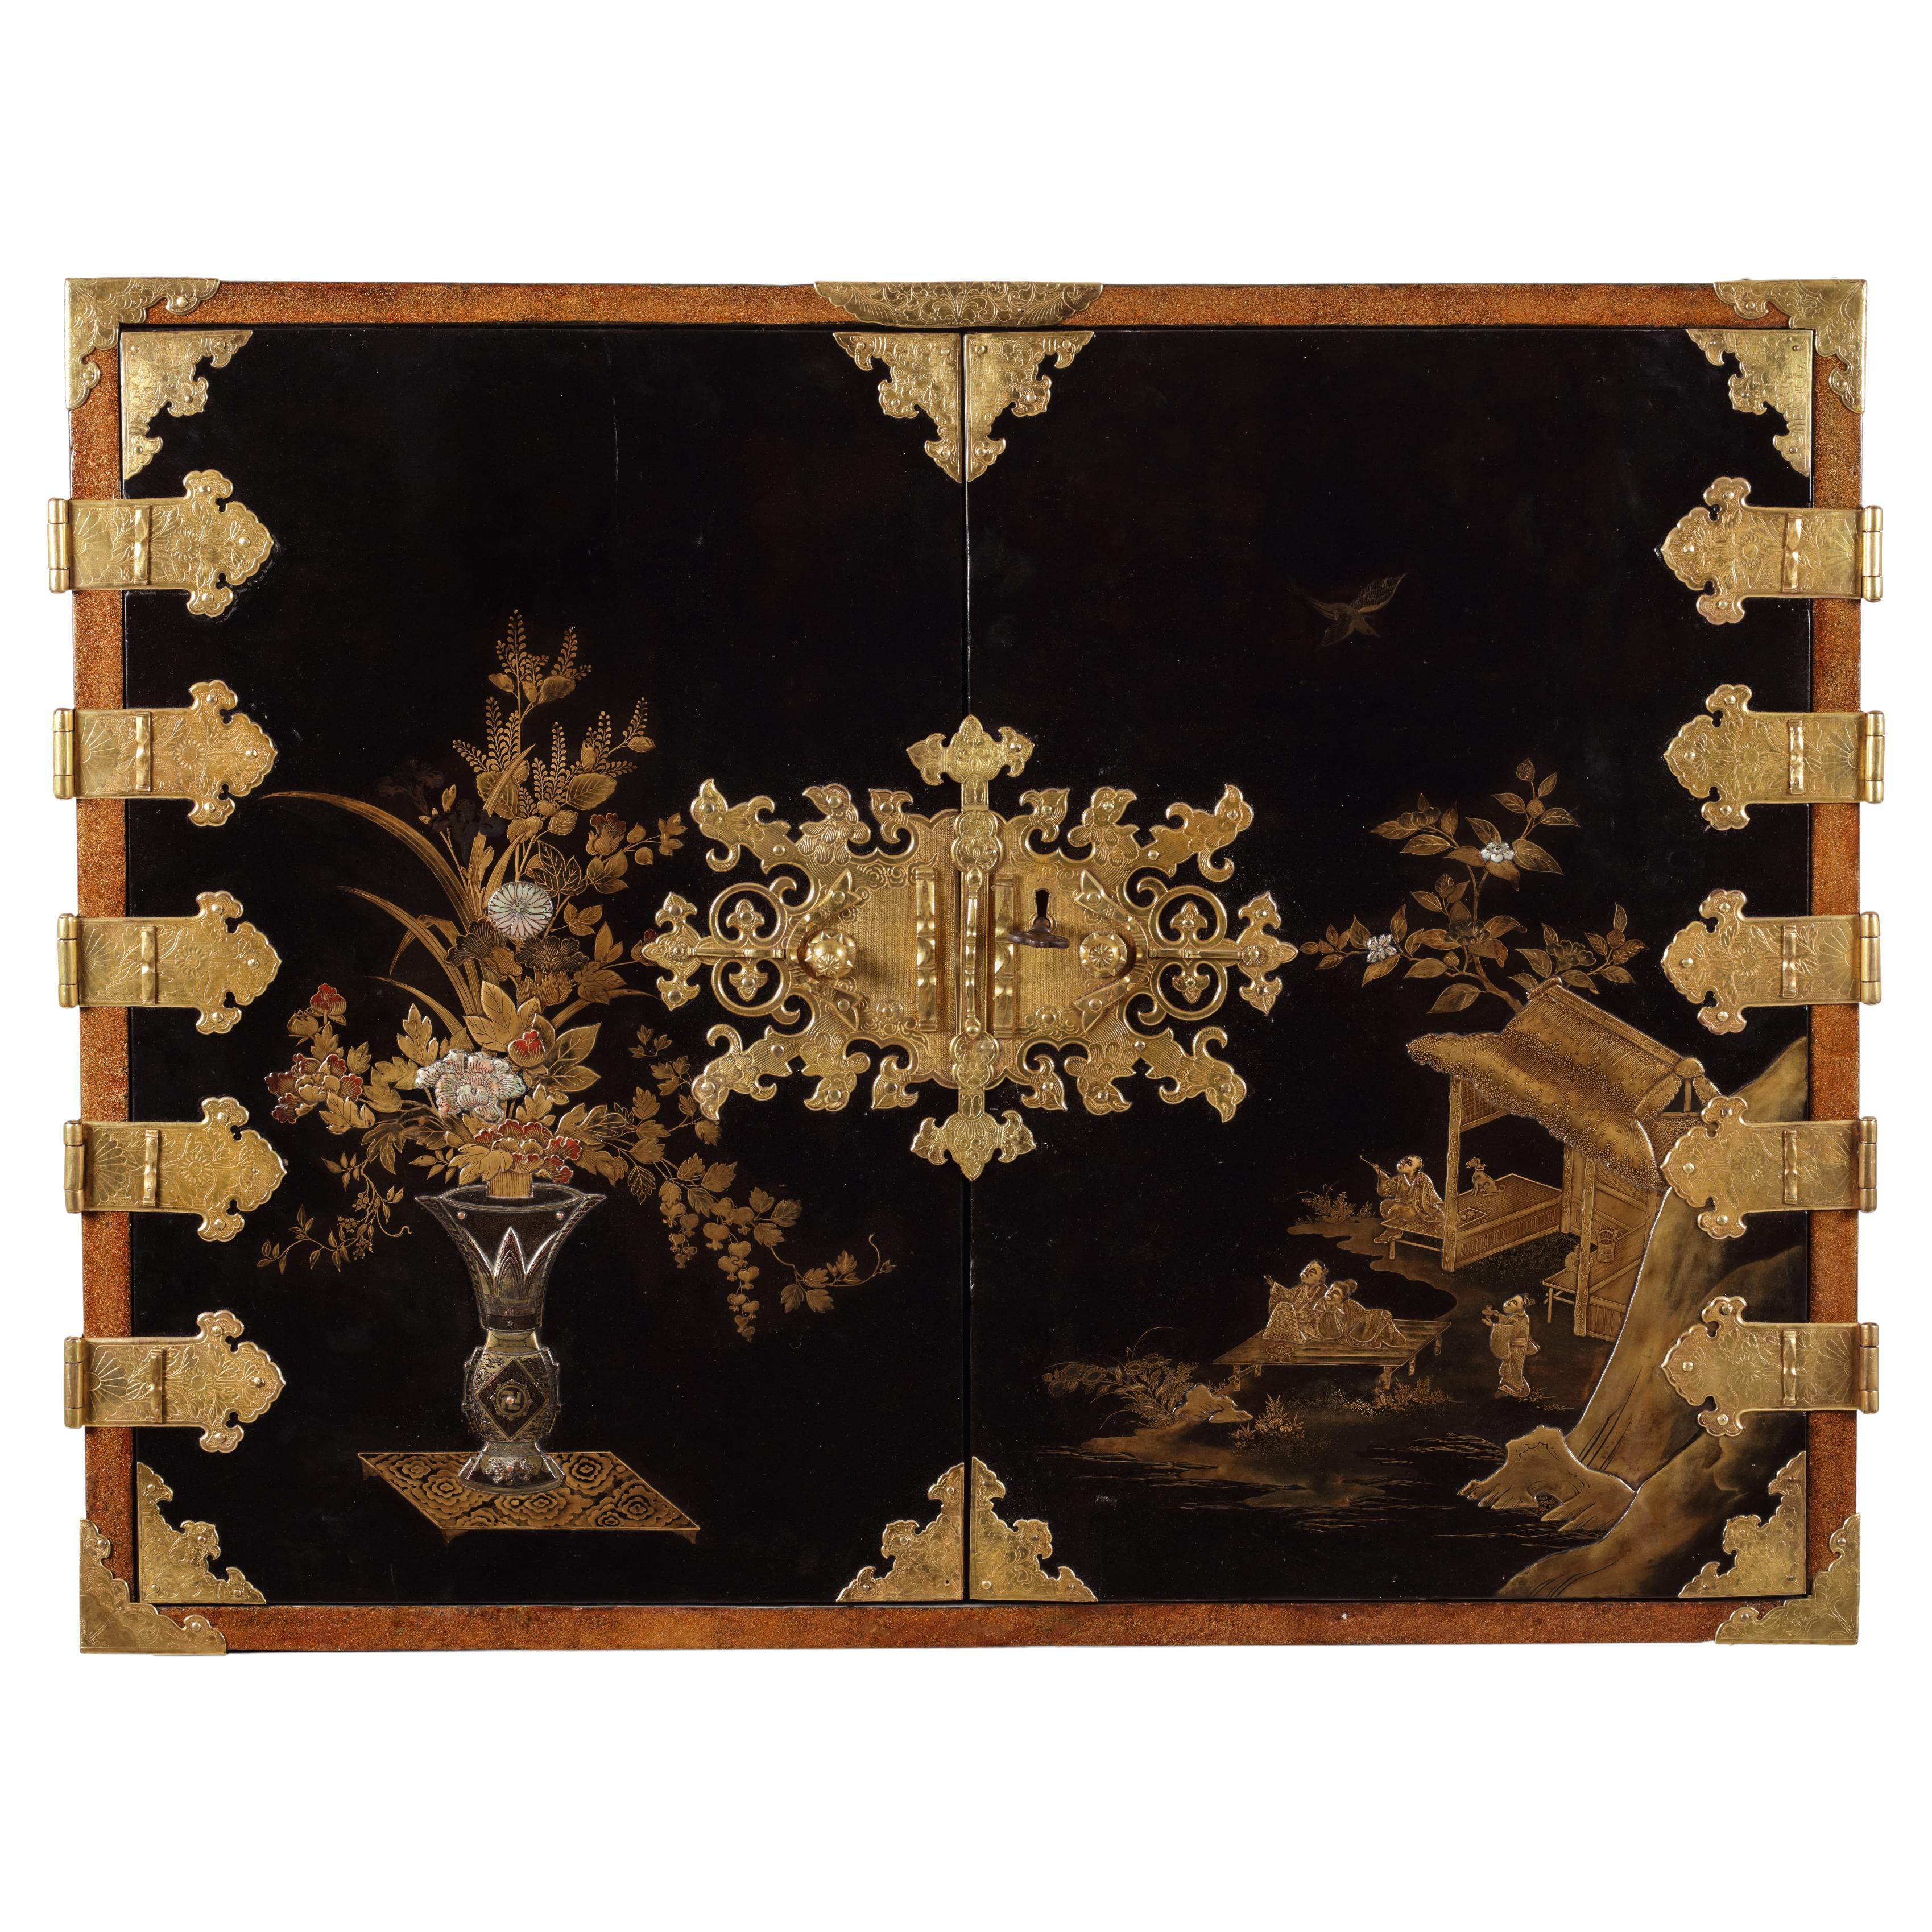 Extremely Fine and Rare 17th-Century Japanese Export Lacquer and Inlaid Cabinet 